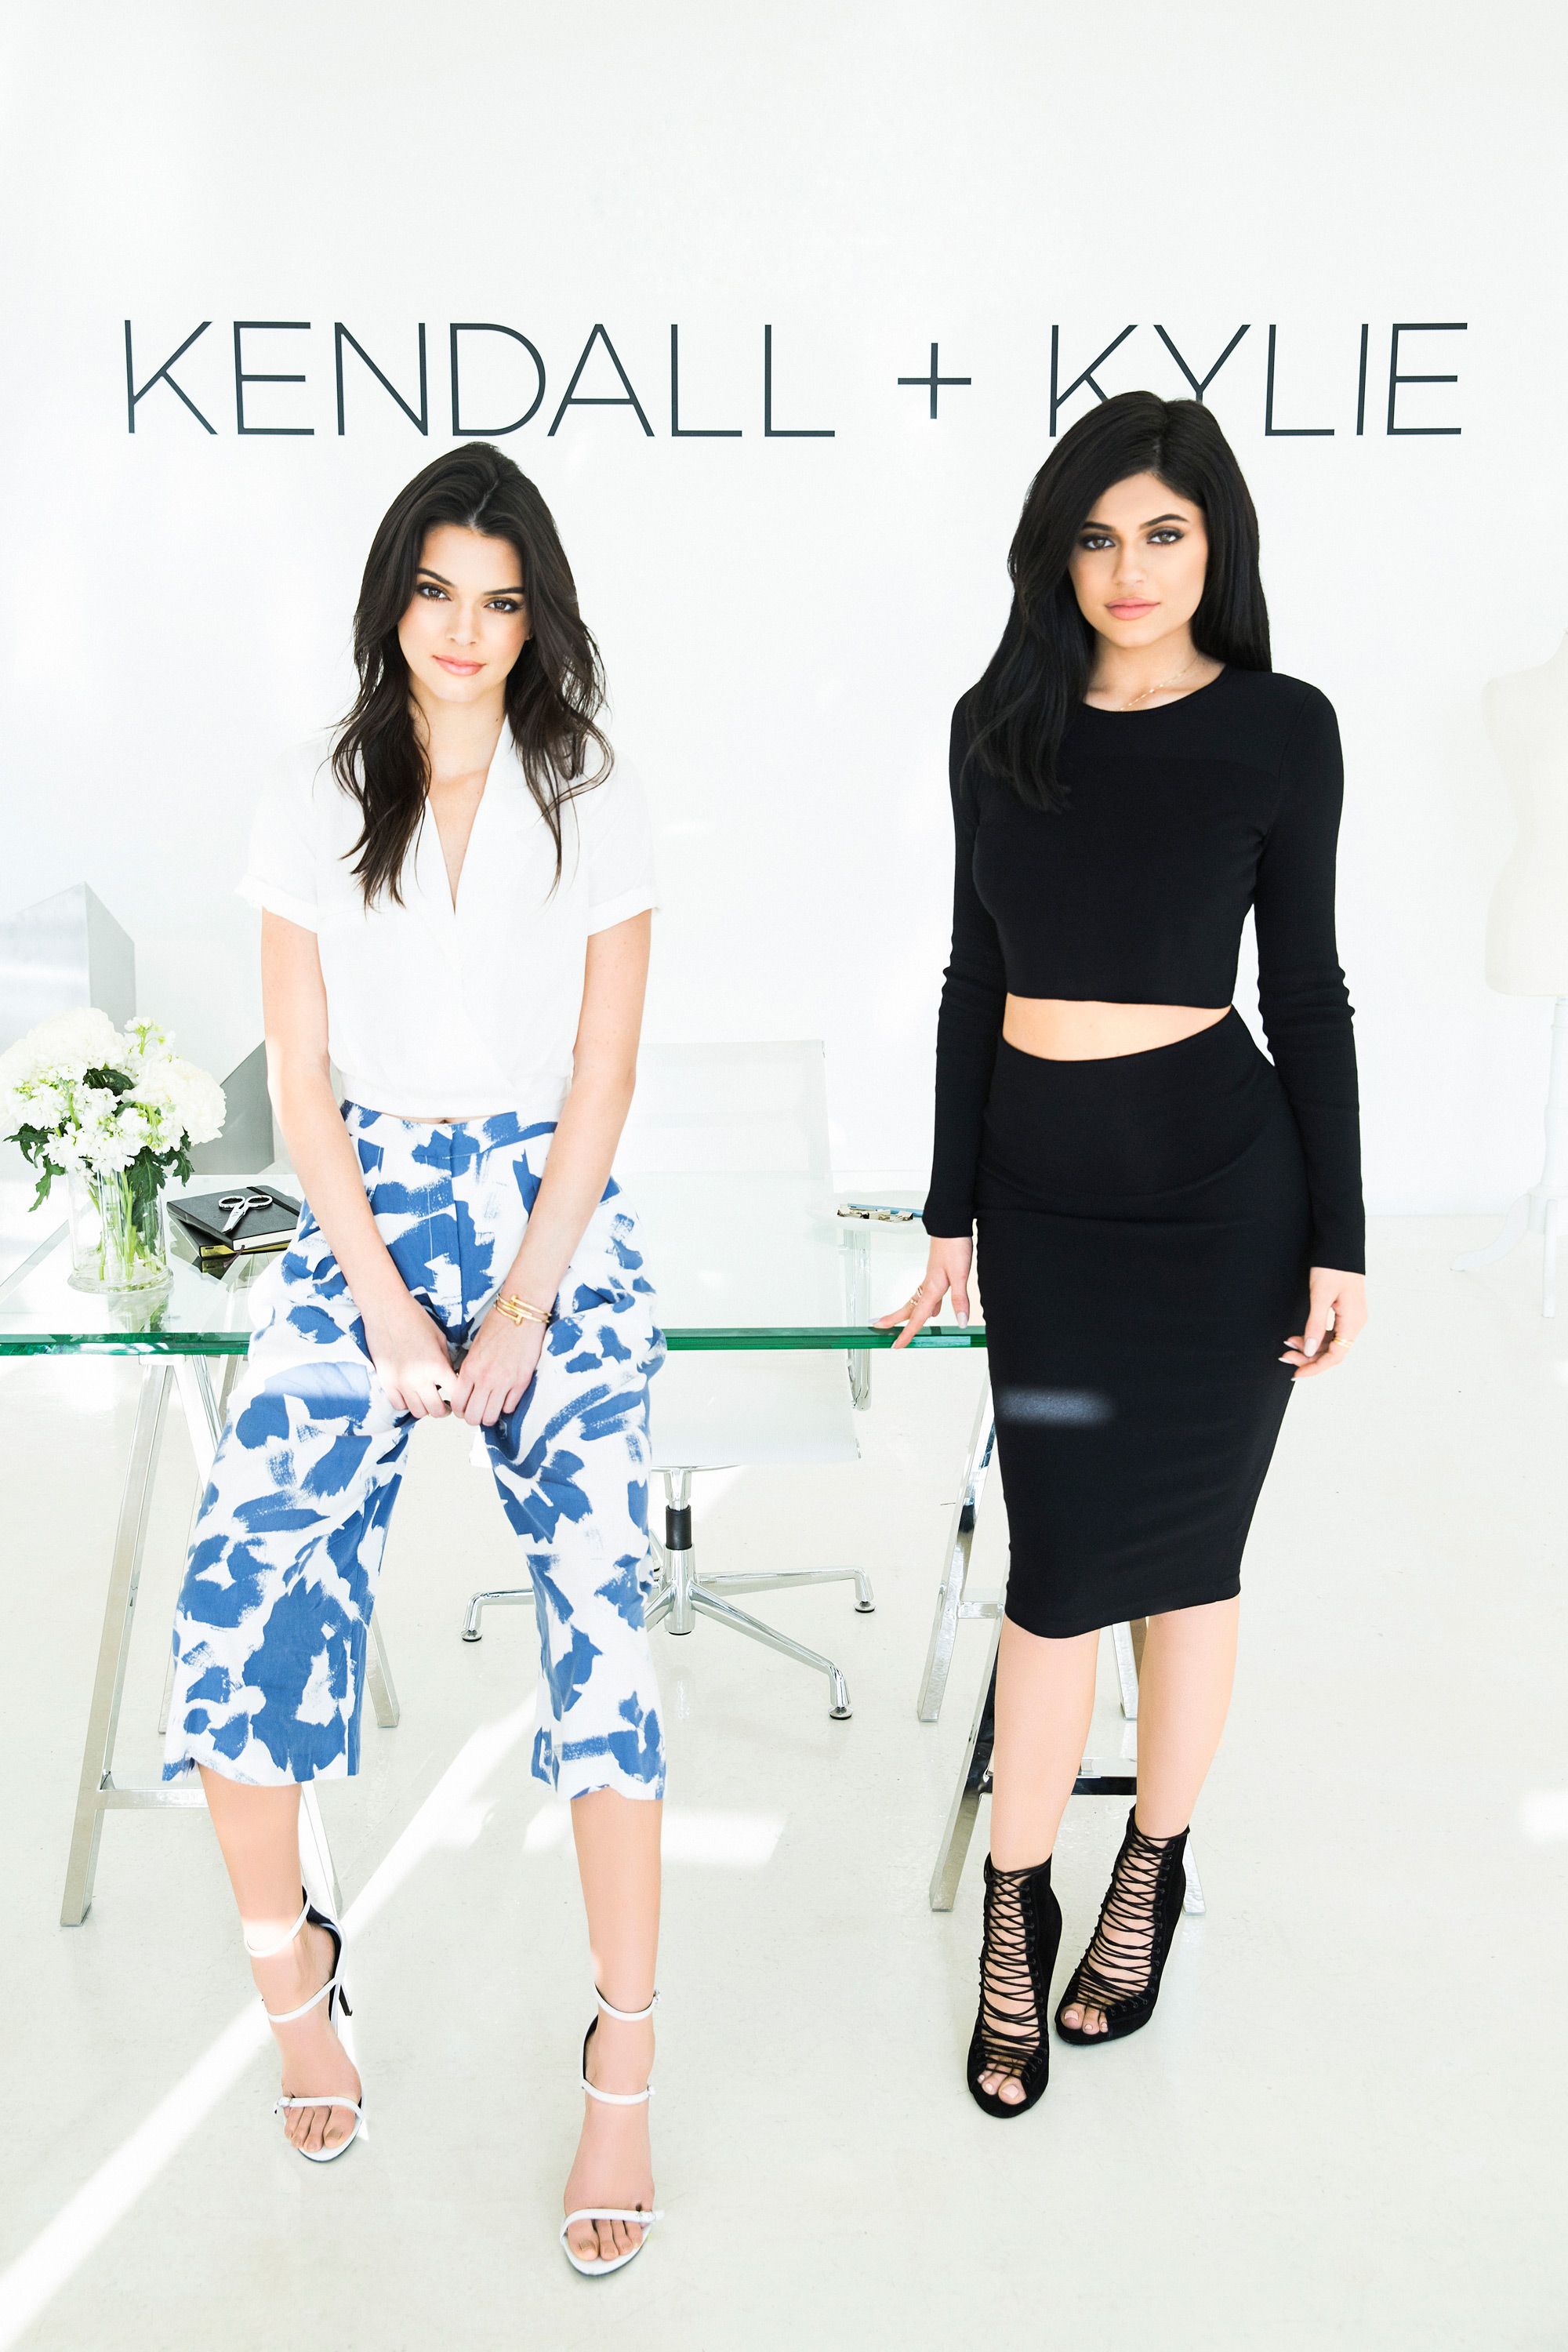 Kendall and Kylie Jenner Are Finally Collaborating on a Makeup